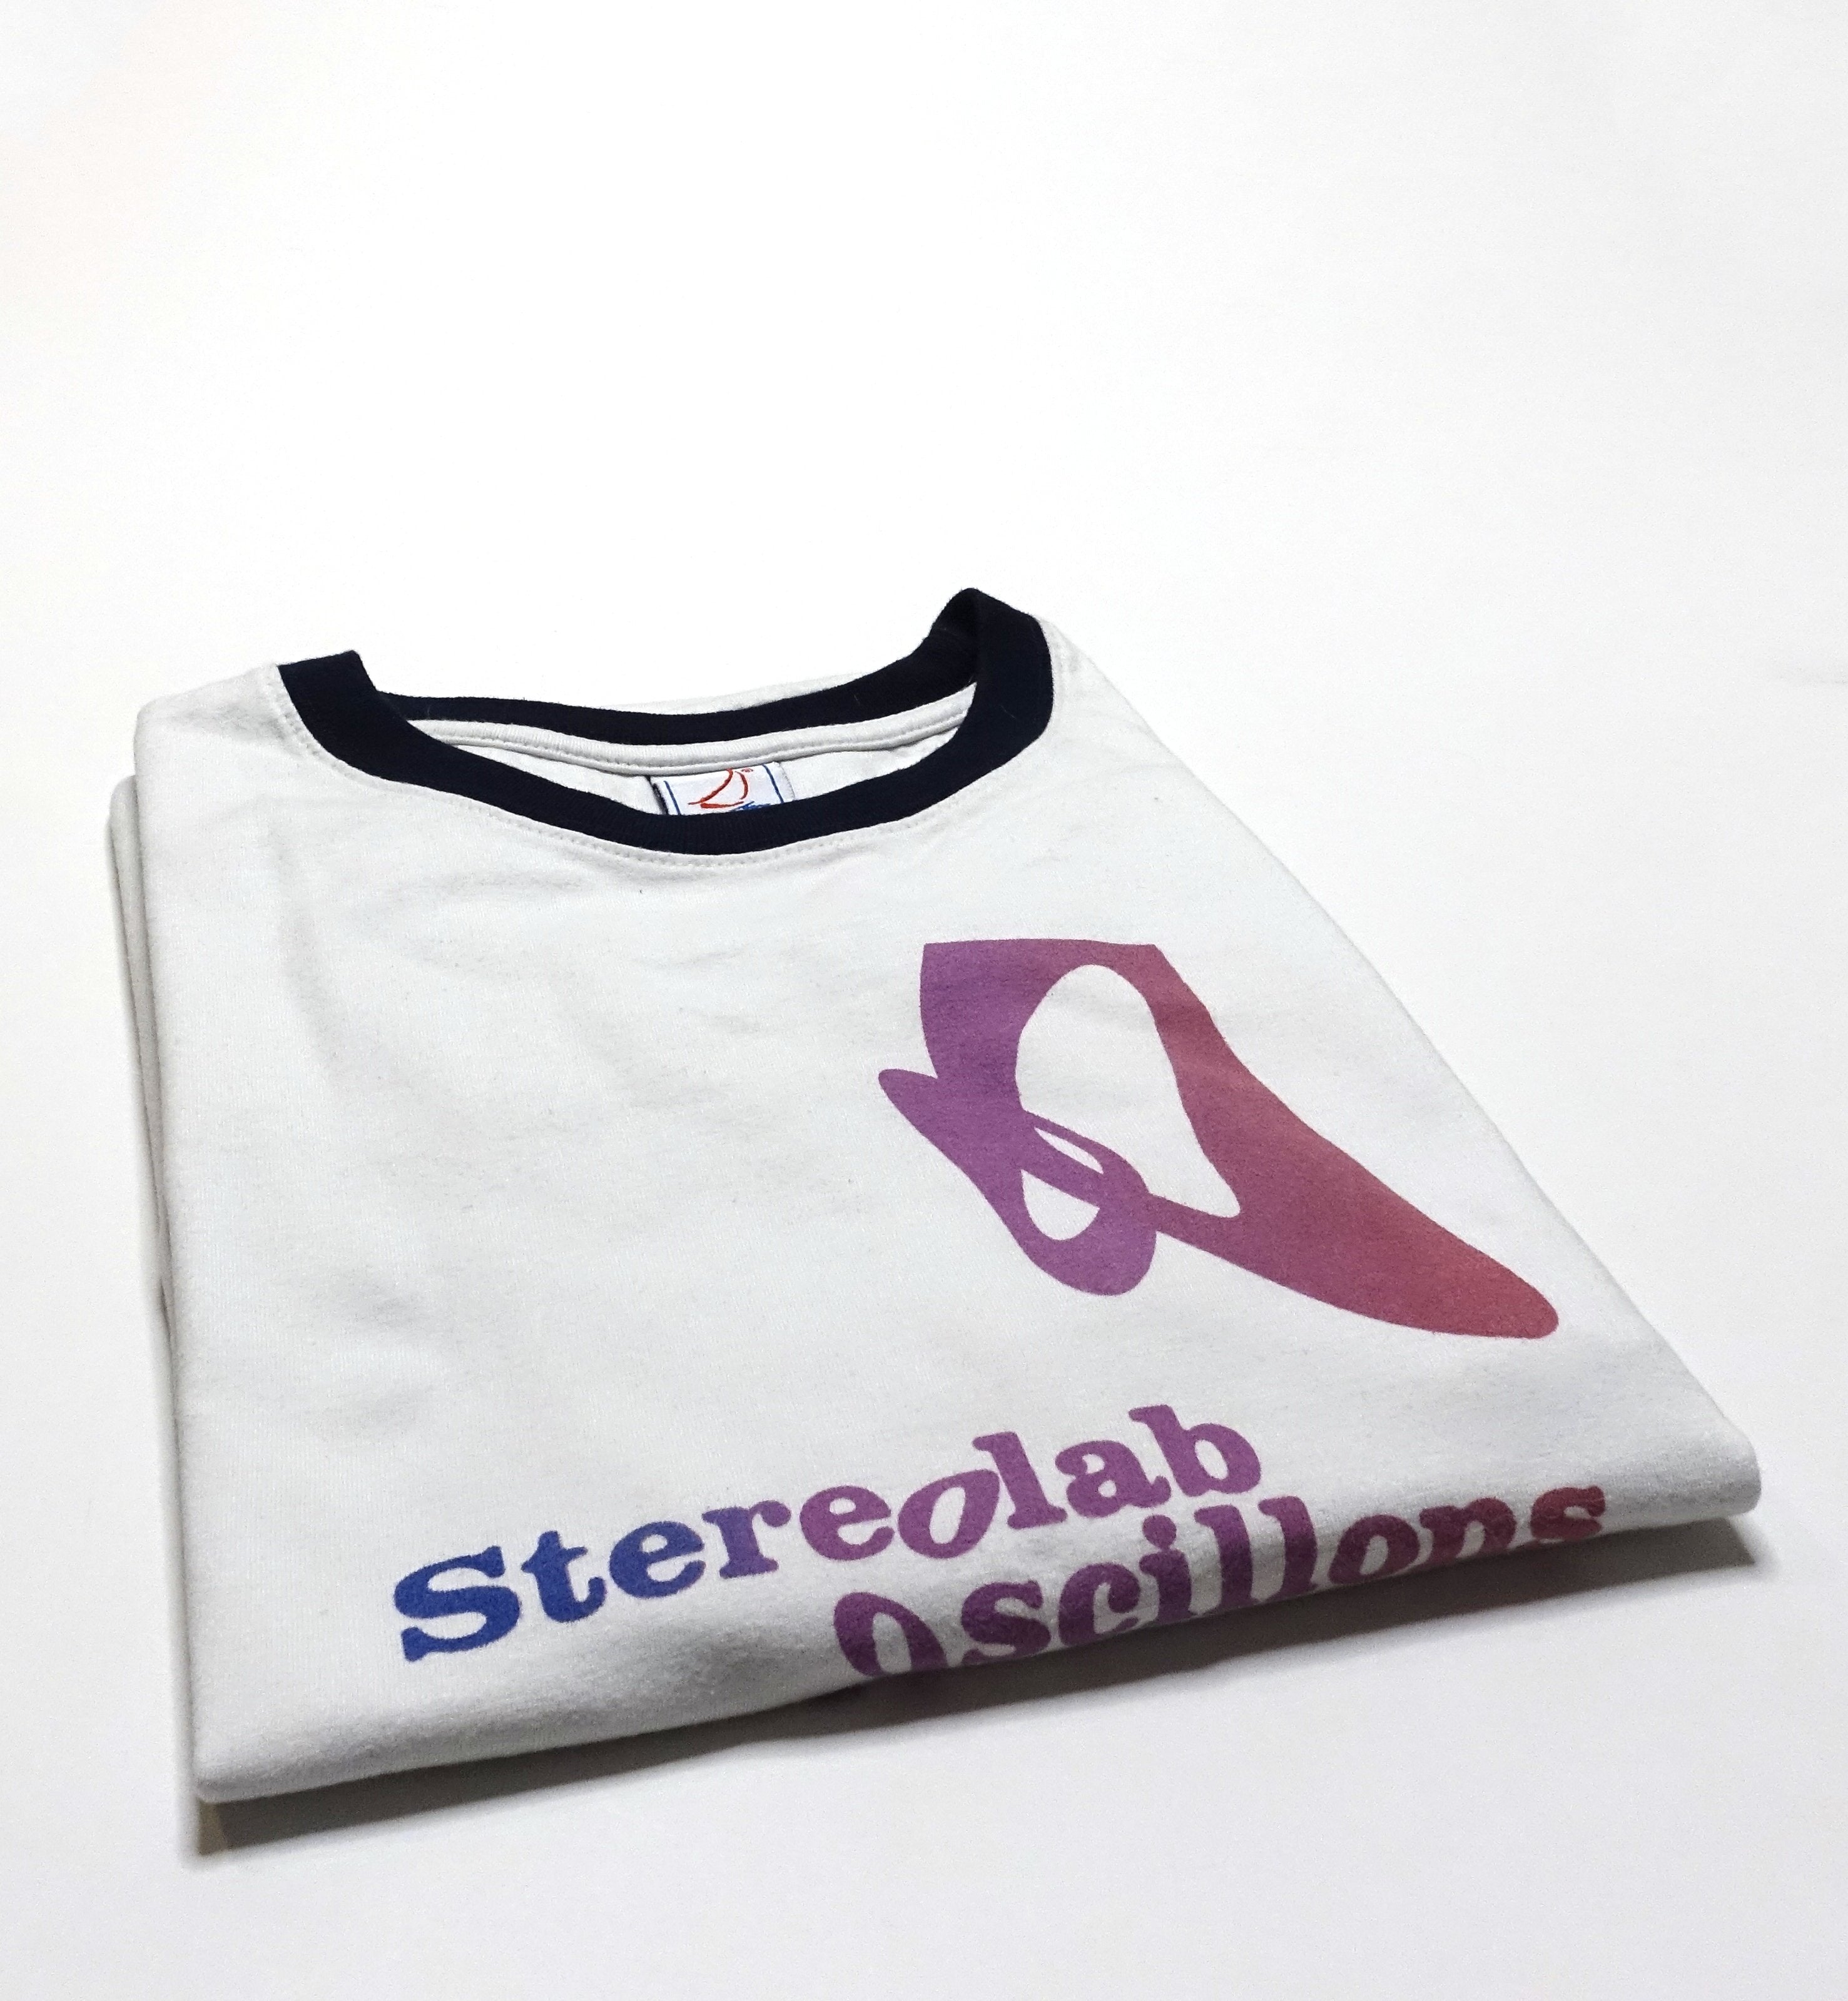 Stereolab – Oscillons From The Anti-Sun 00's Tour Shirt Size XL